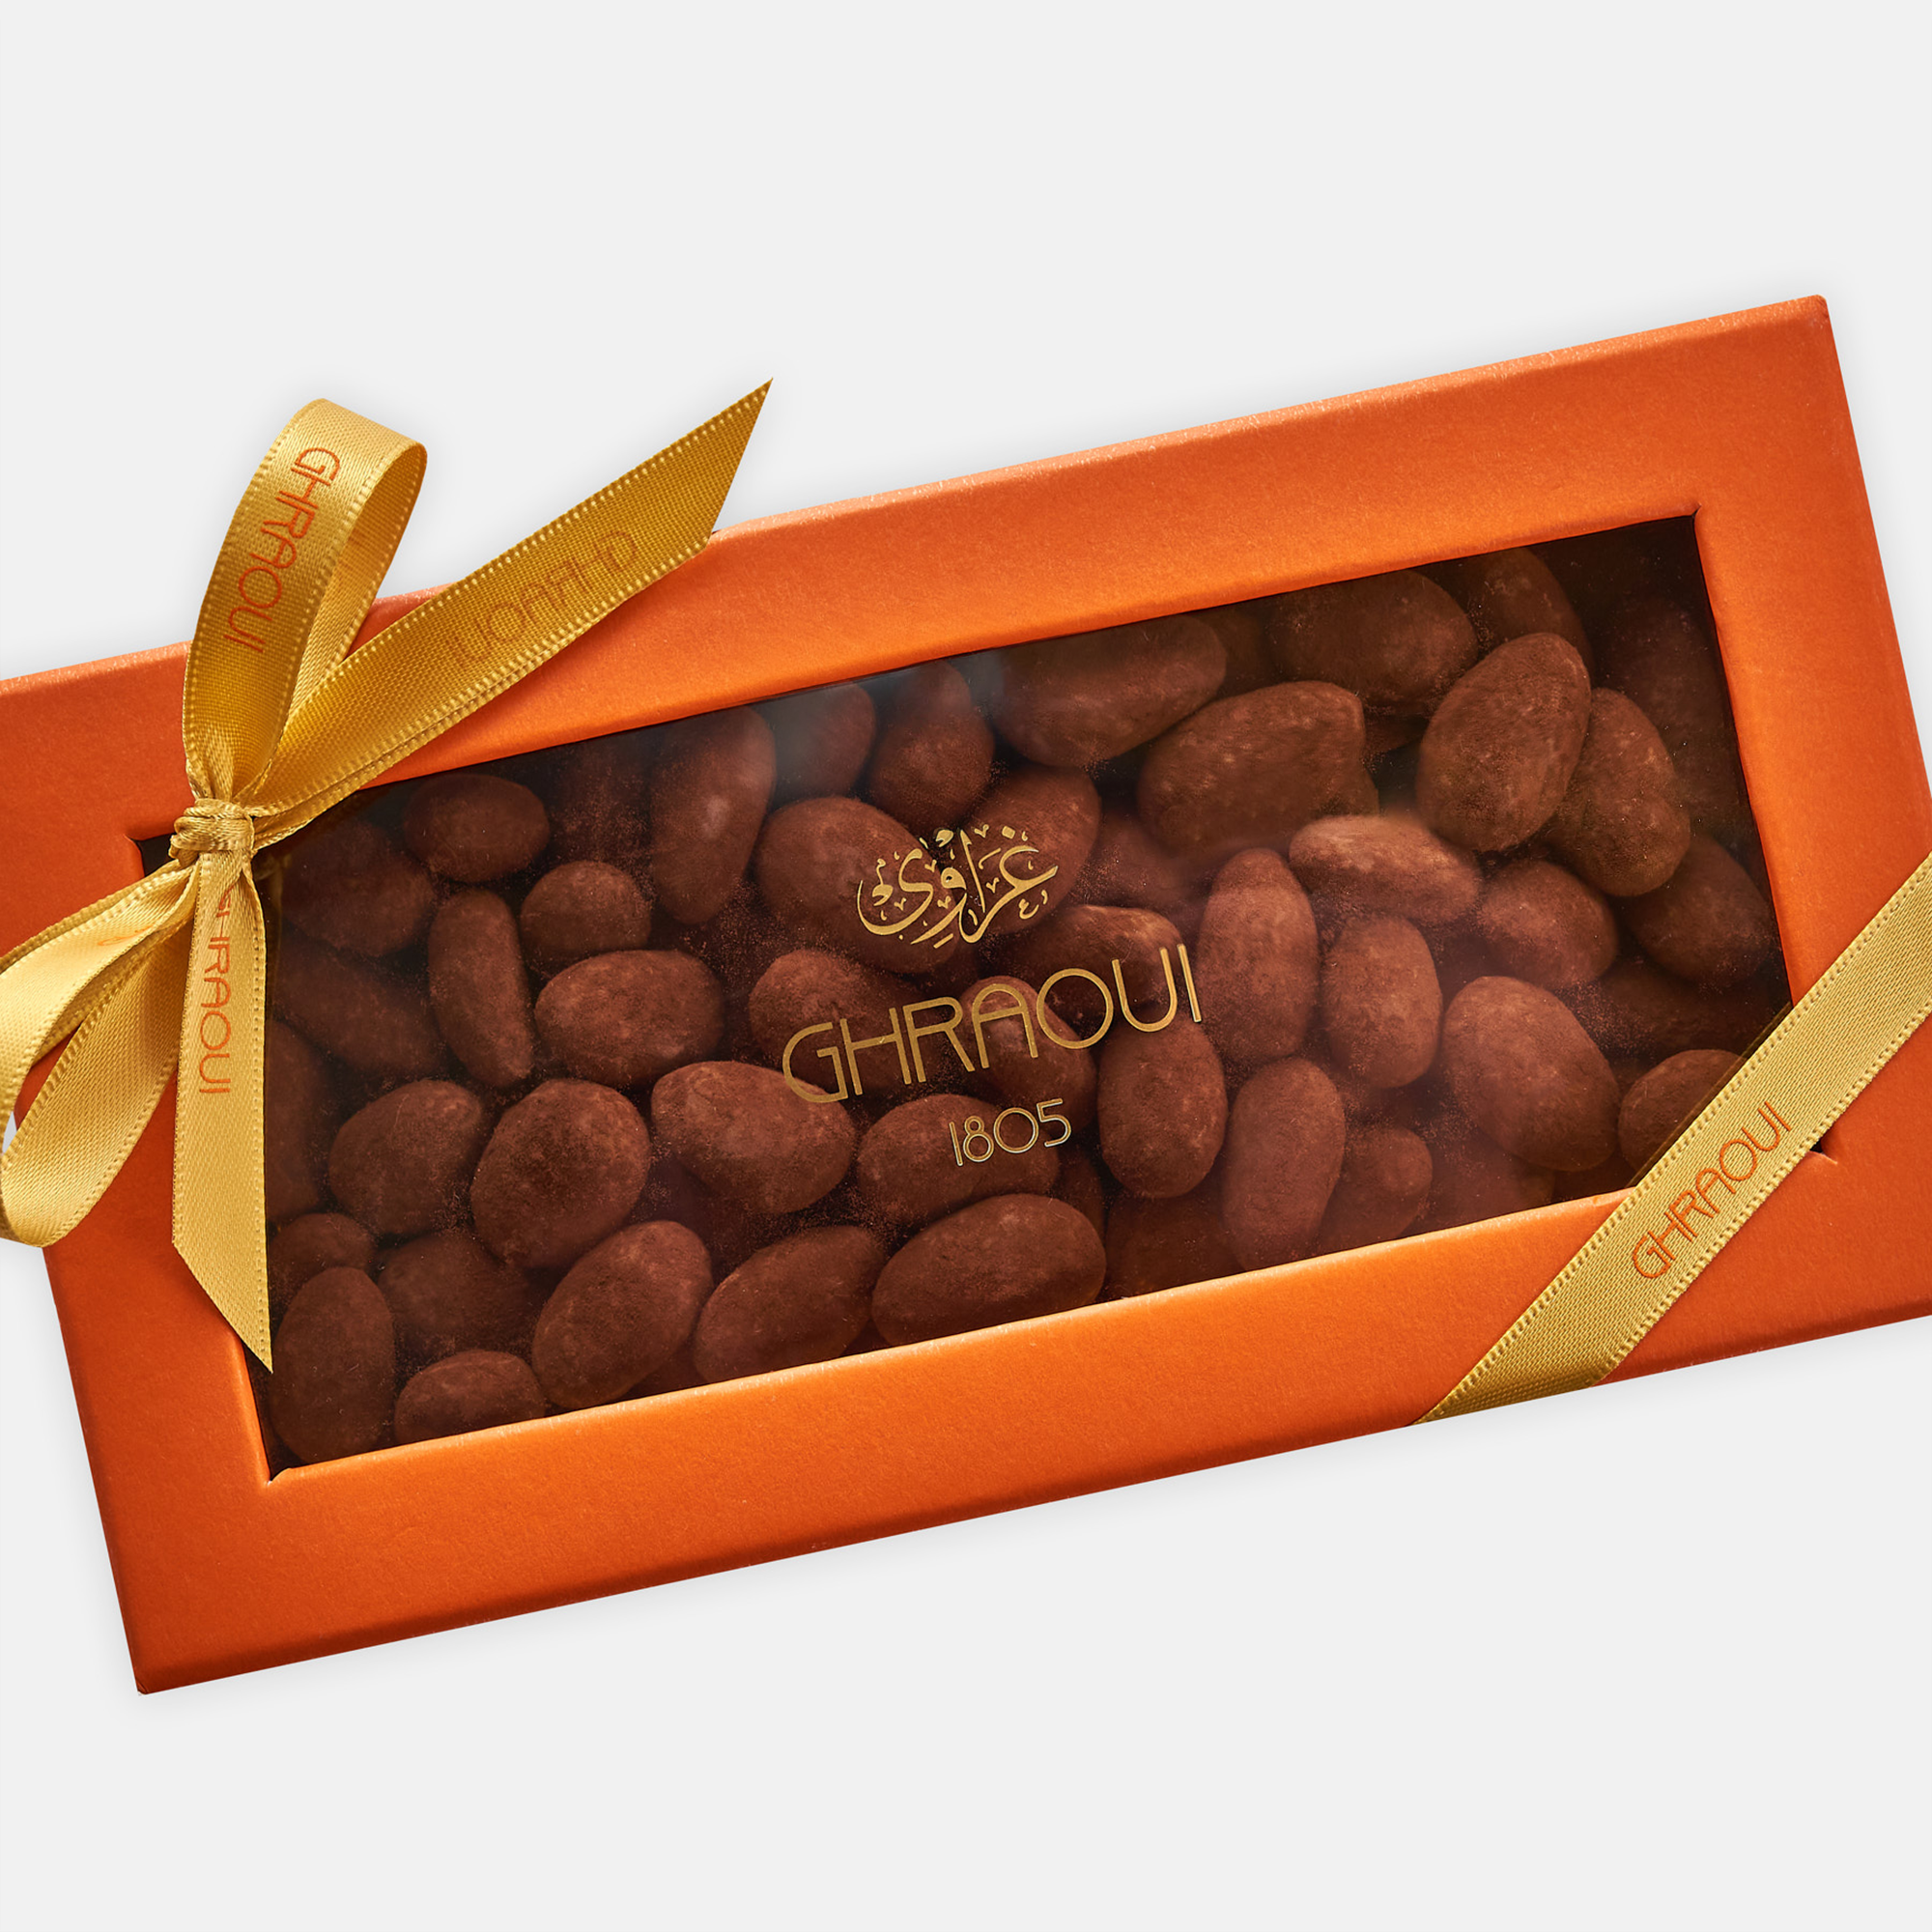 Roasted almonds coated with praline and dusted in cocoa powder - ghraoui-chocolate Edit alt text